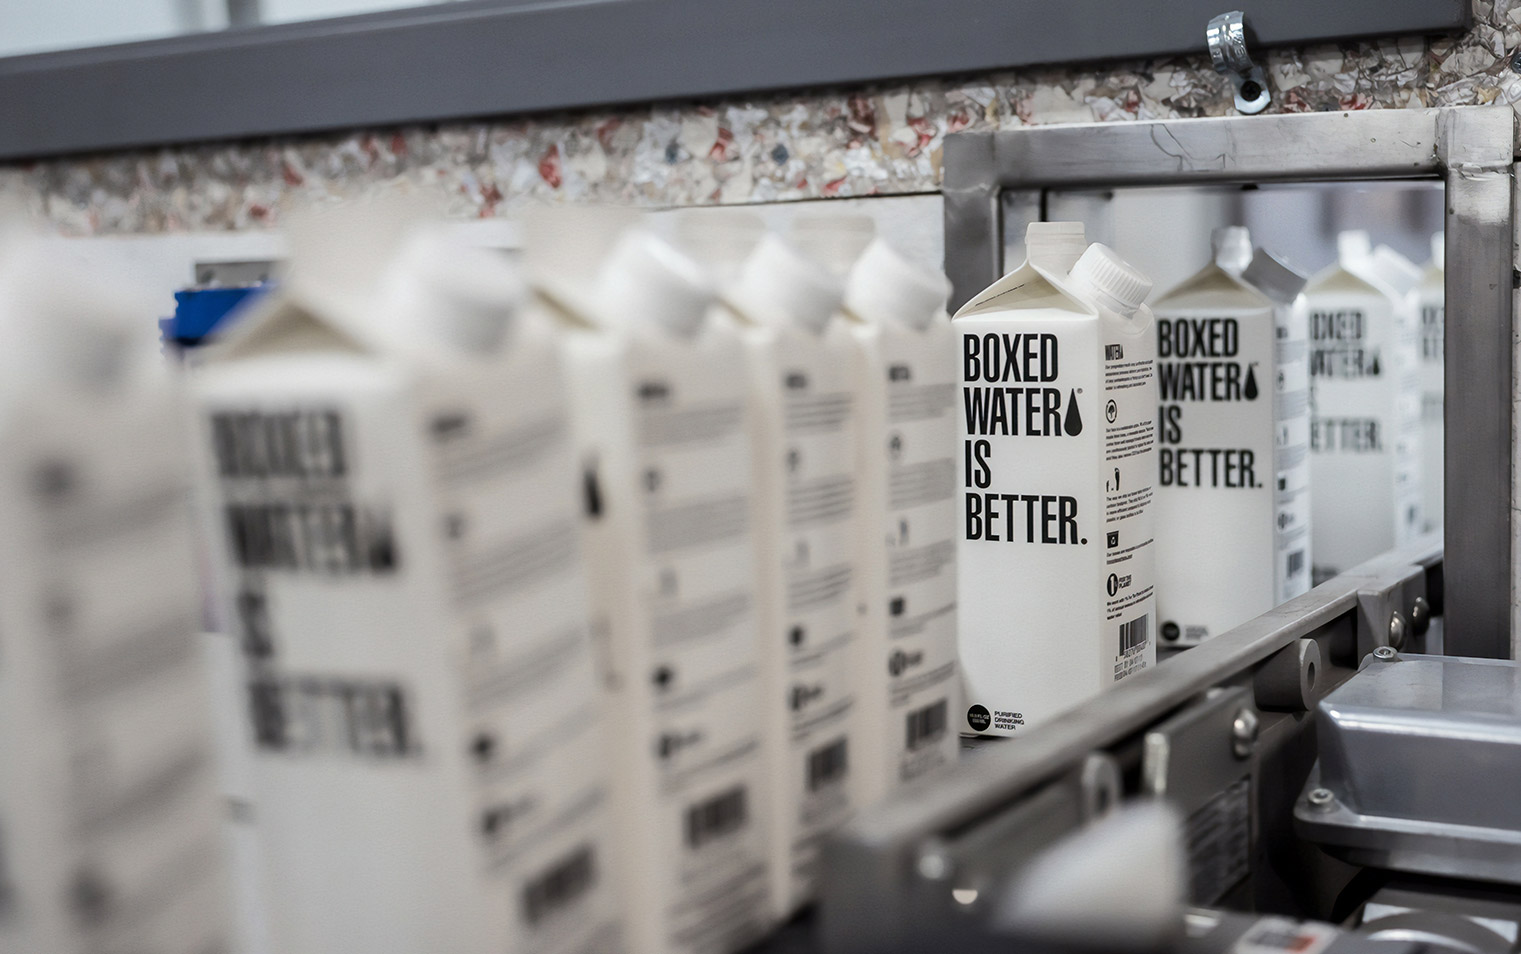 Assembly line of boxed water